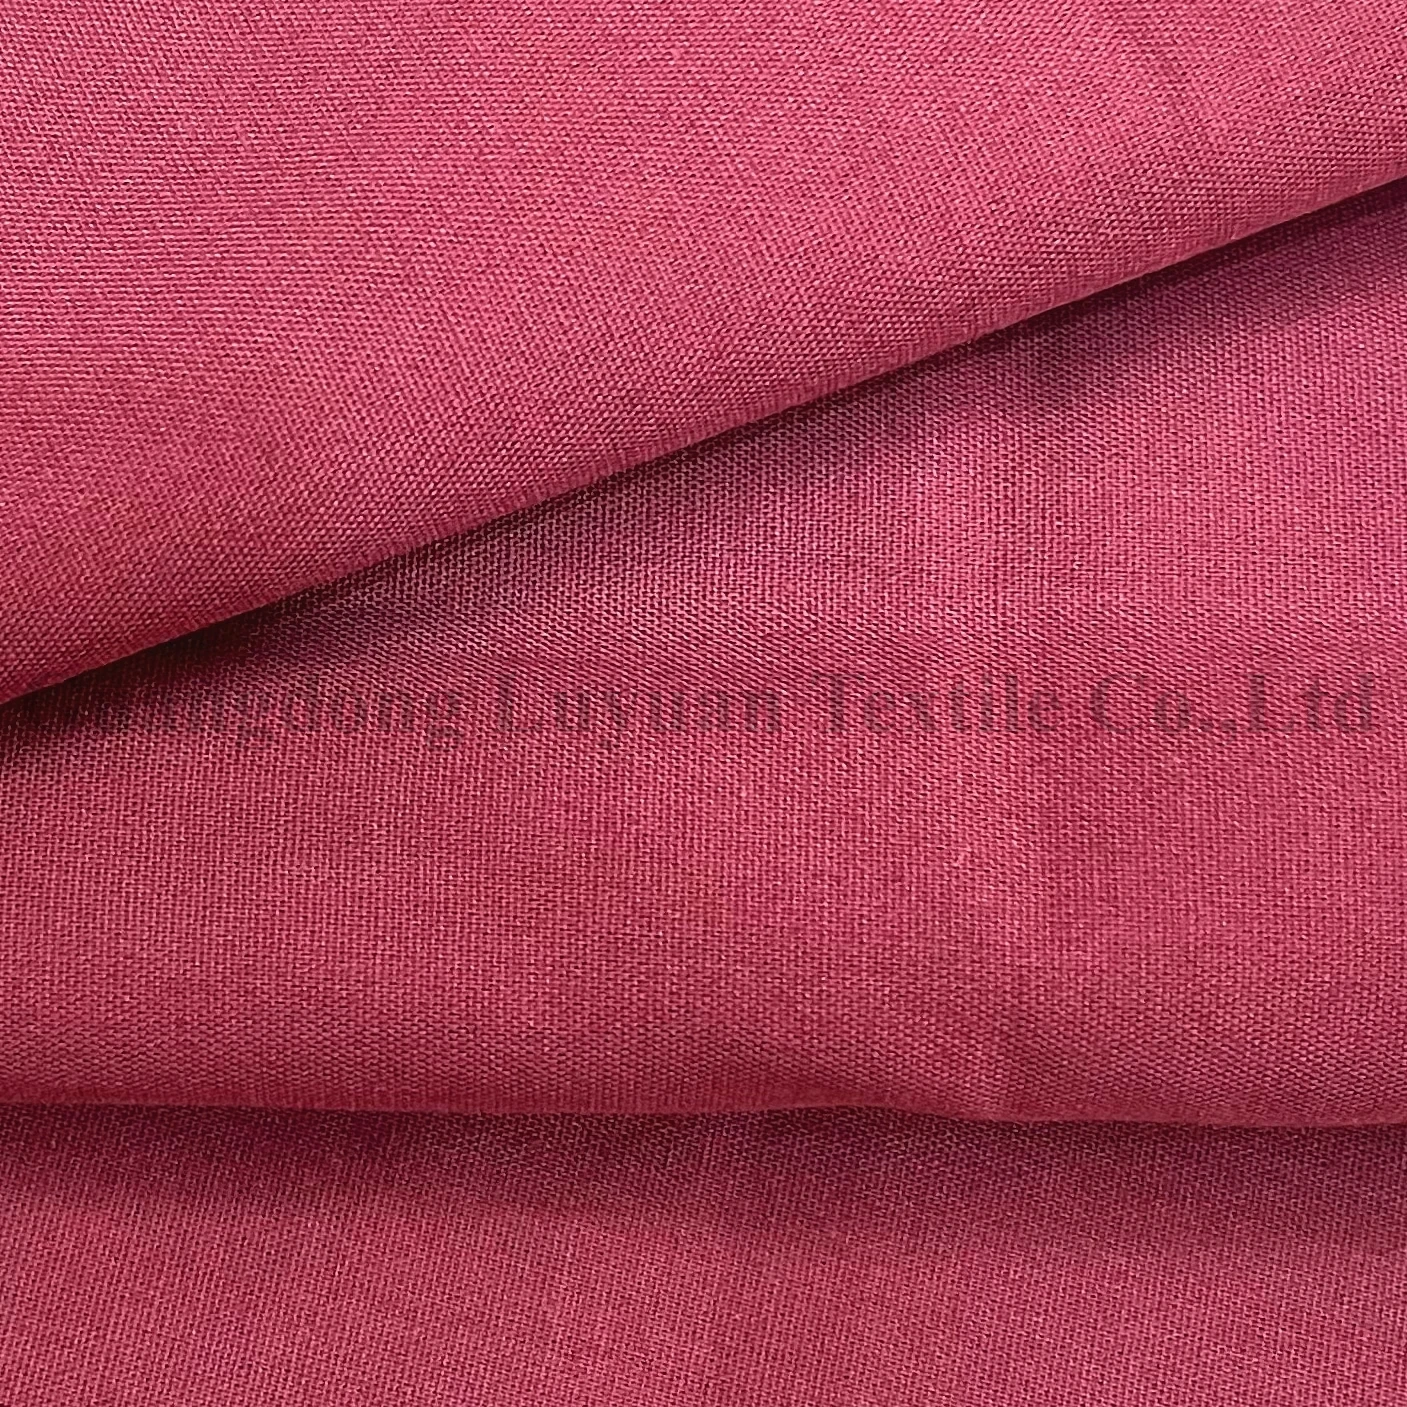 Shirt material 65 polyester  35 cotton dyeing color customization